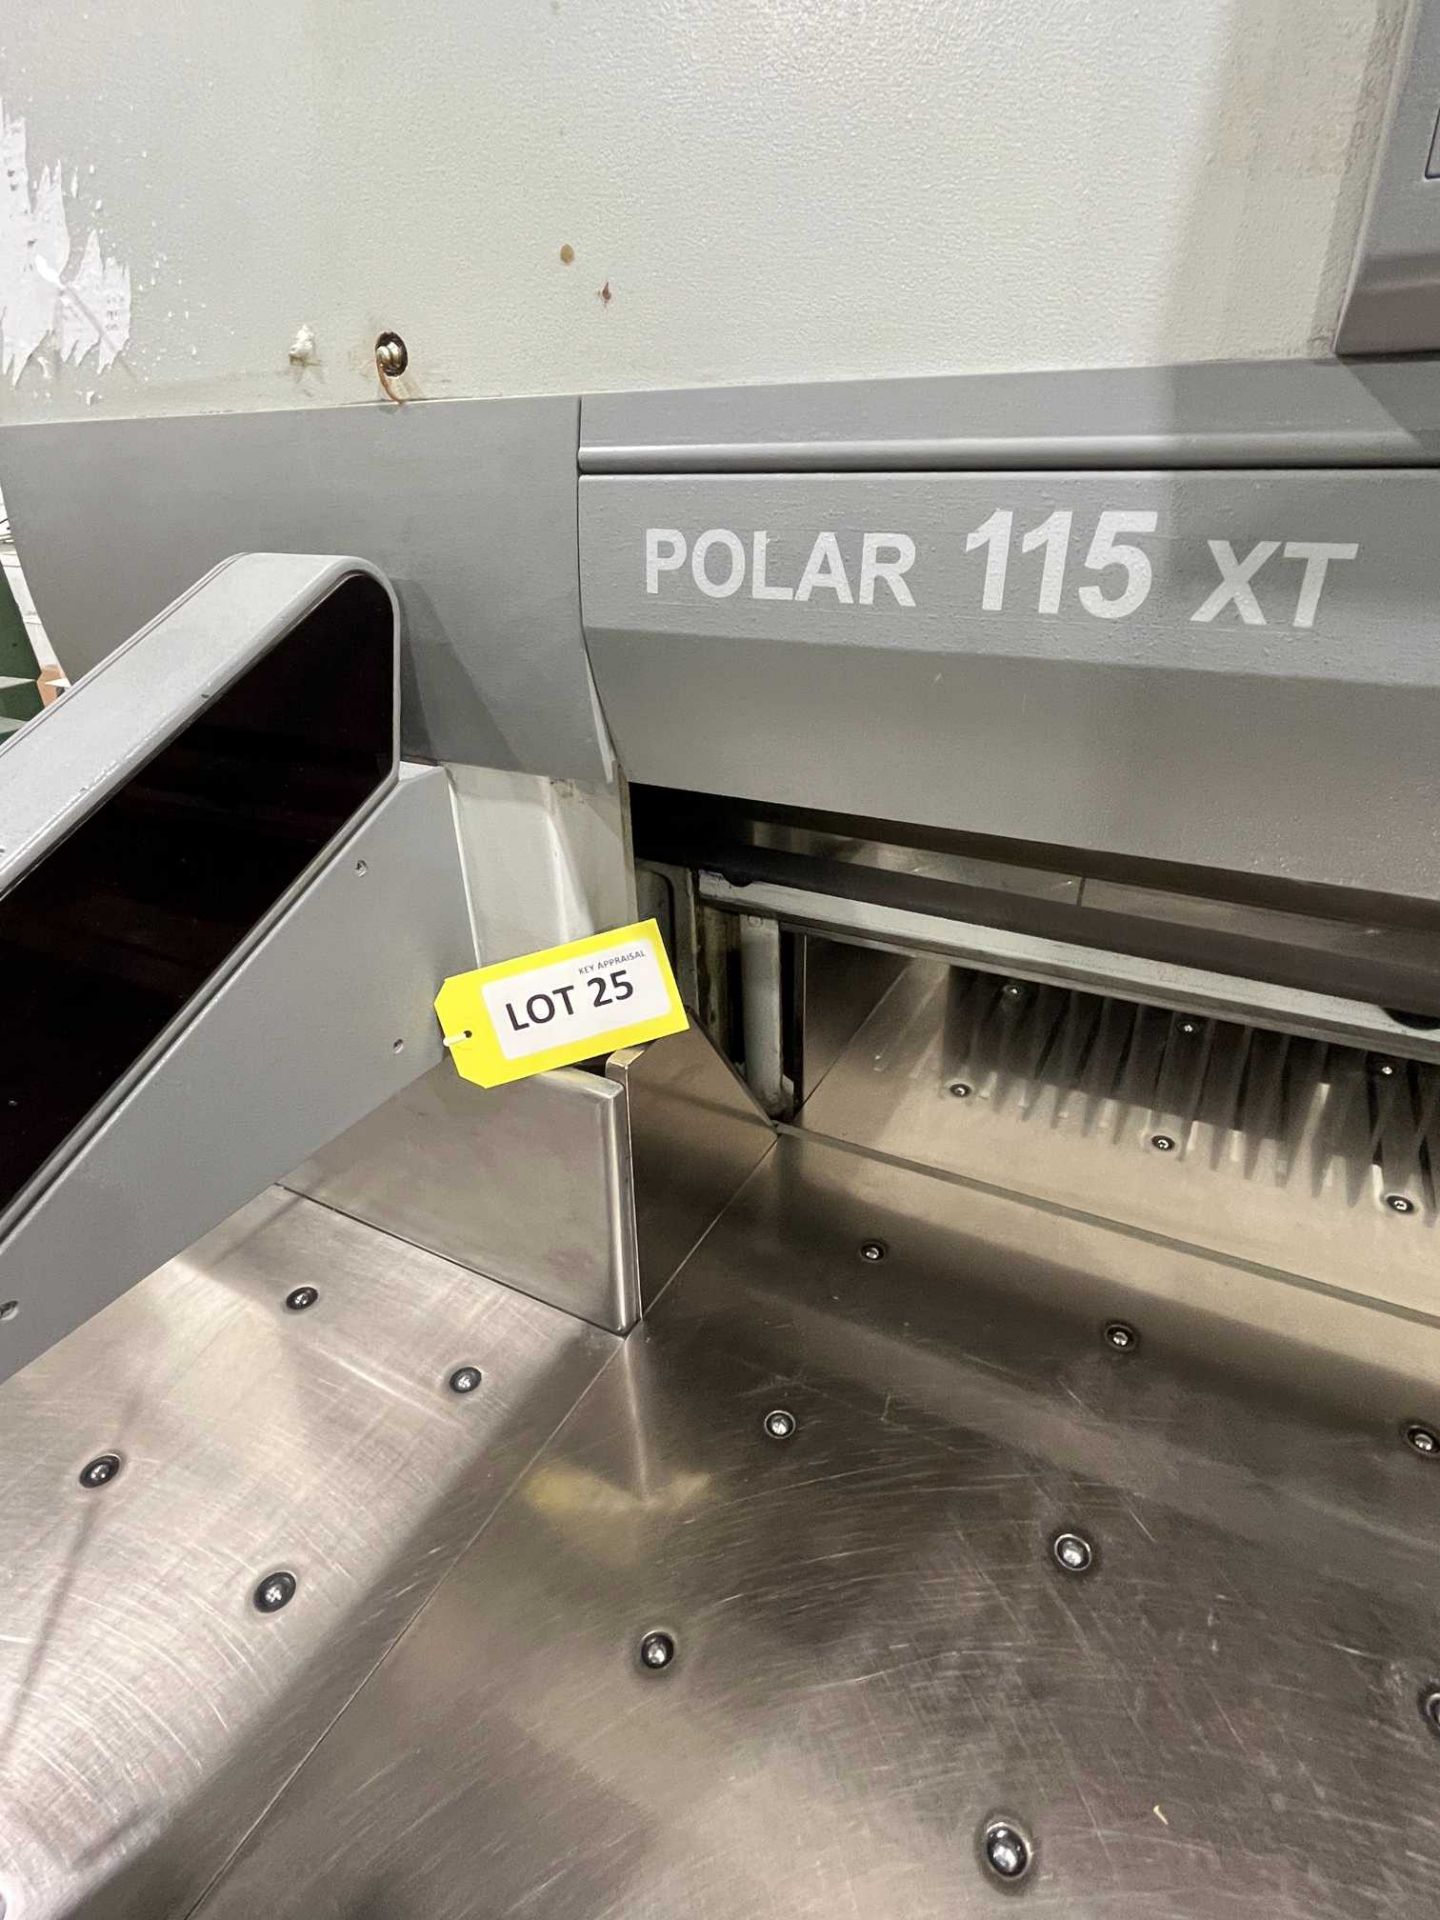 Polar 155 XT 115mm guillotine; Serial No: 7431643 (2004) with spare blade